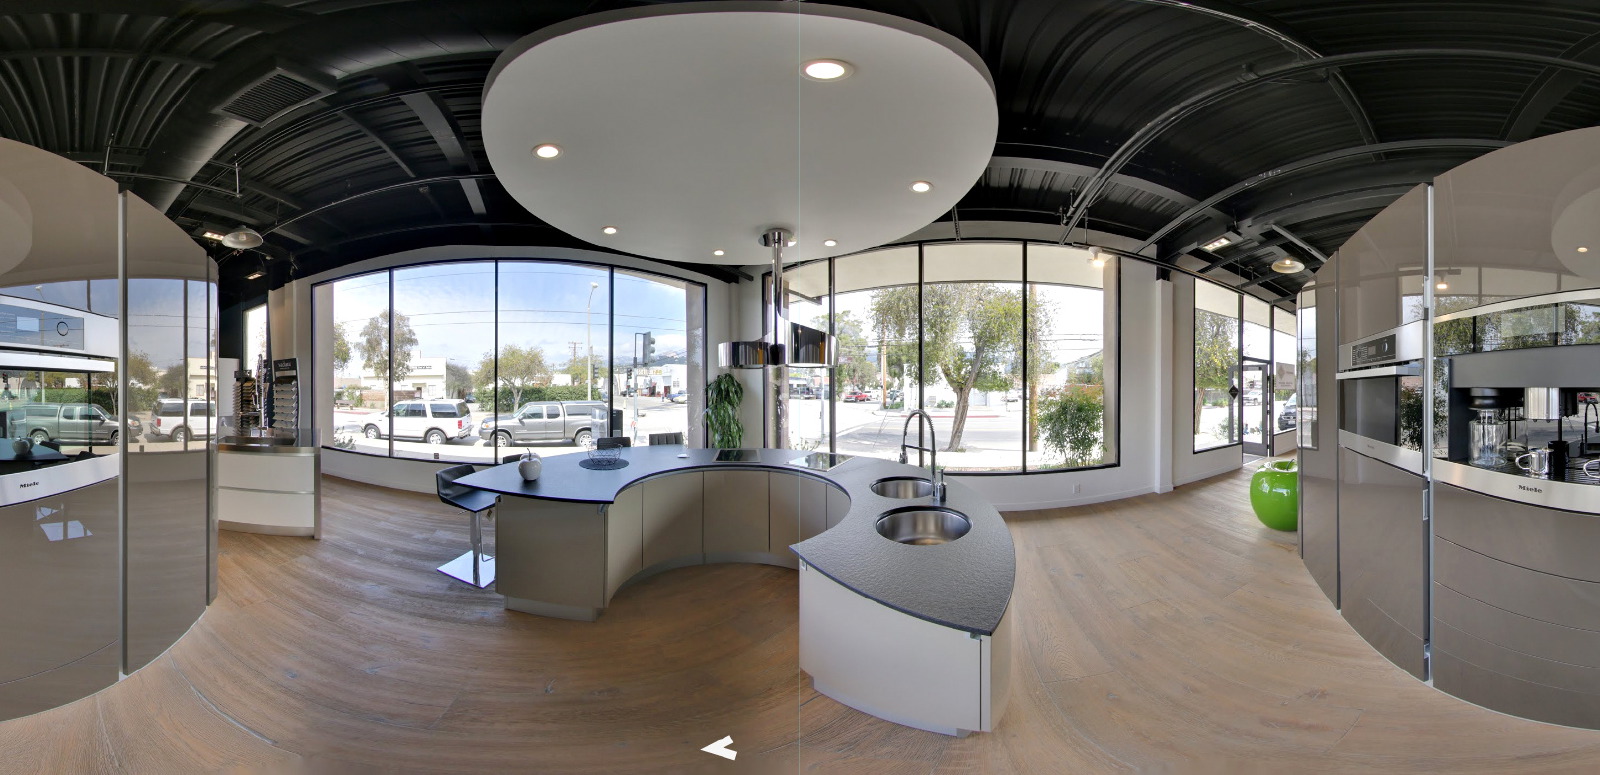 Google virtual tour with street view technology made by 805 Productions Santa Barbara